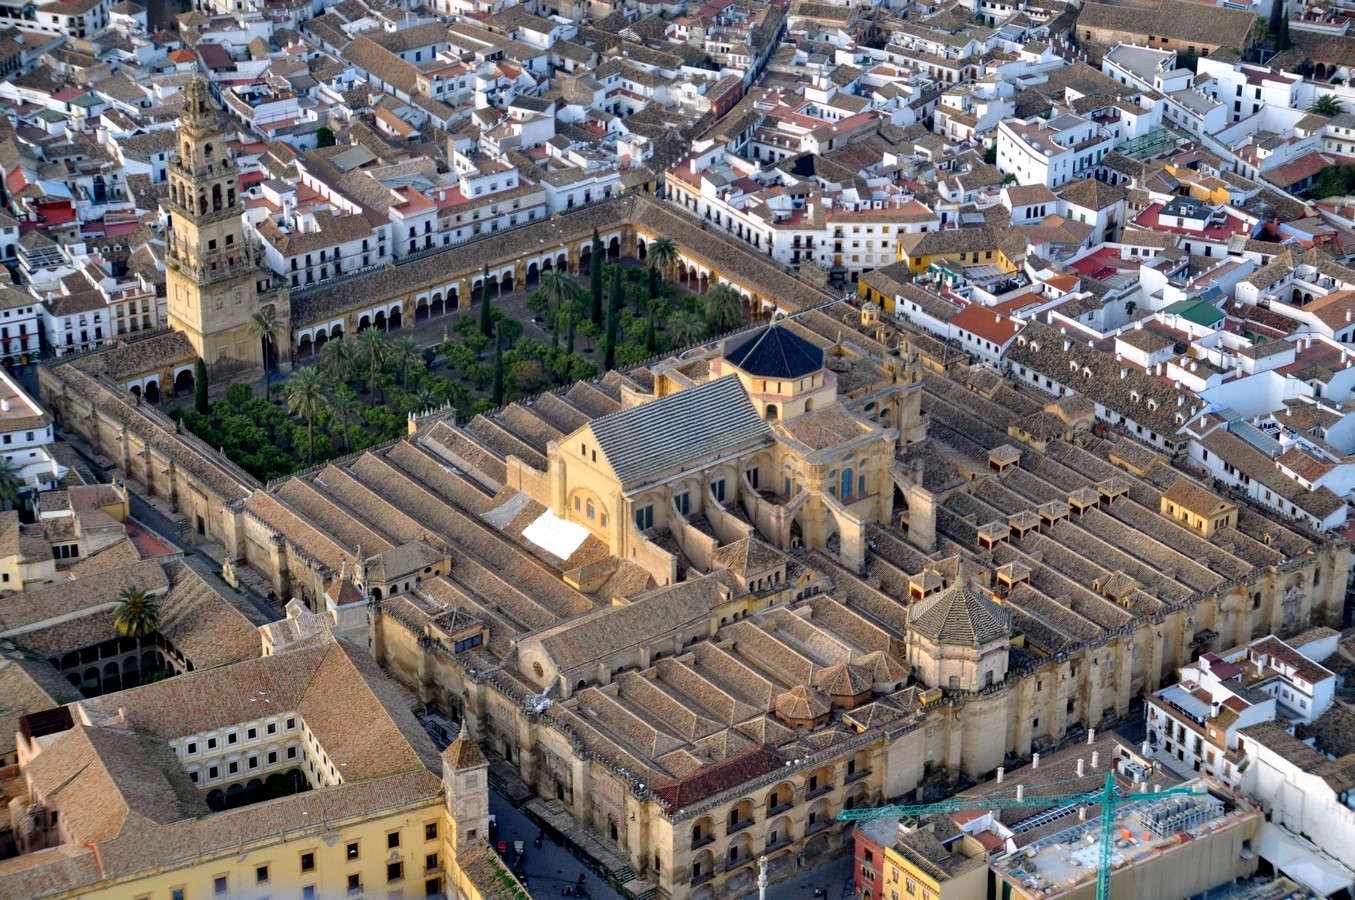 THE GREAT MOSQUE OF CORDOBA - Sheet1